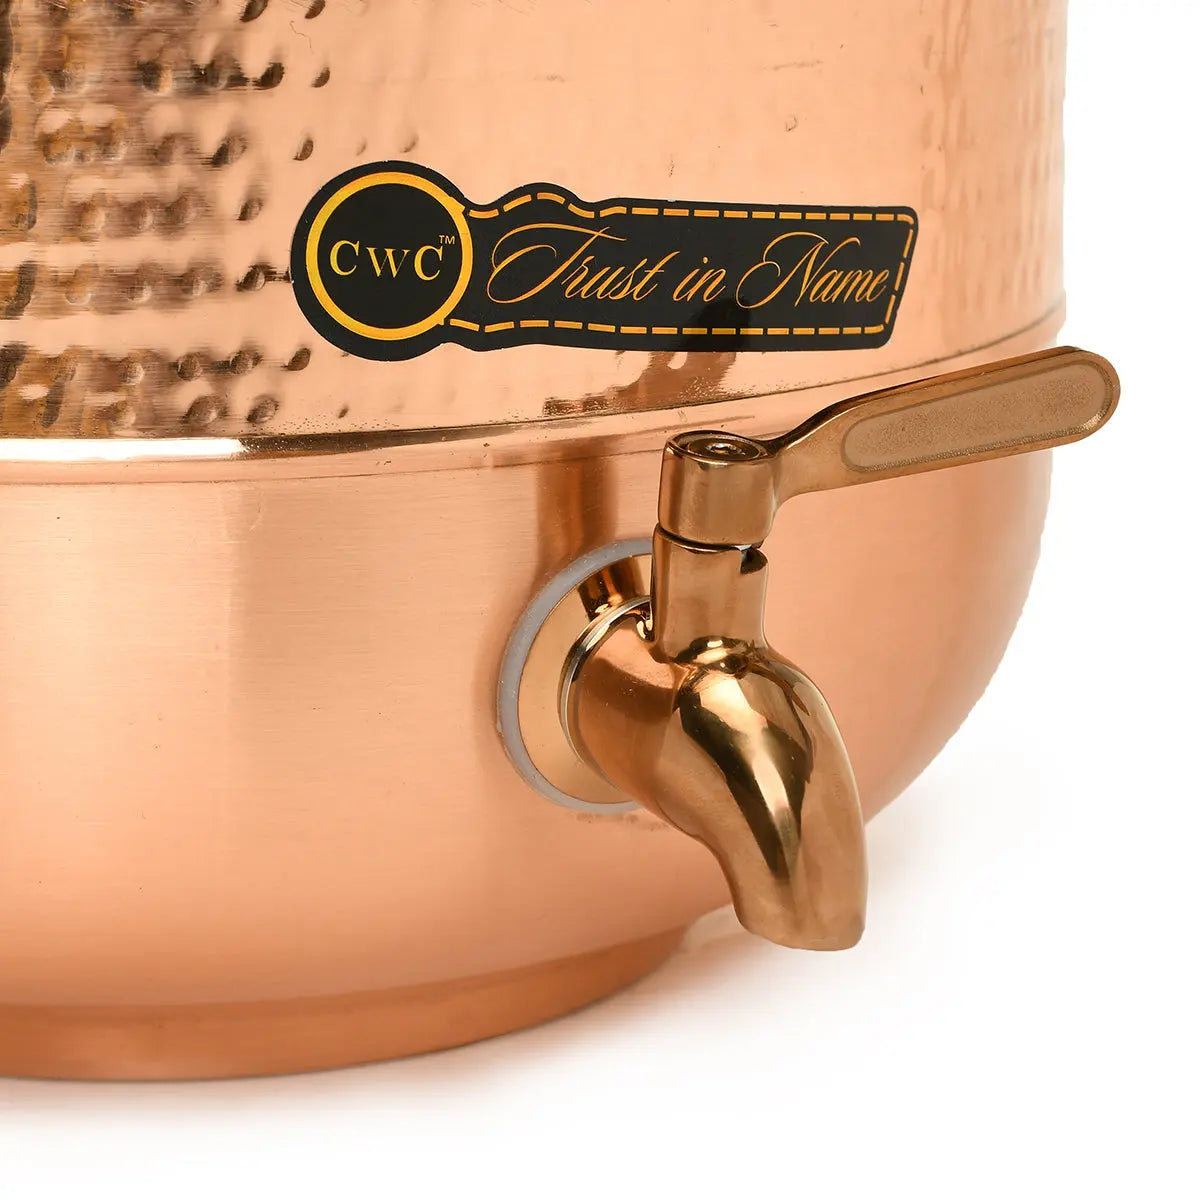 Copper Vessel For Drinking Water Half Hammered Designer With Tap - CROCKERY WALA AND COMPANY 